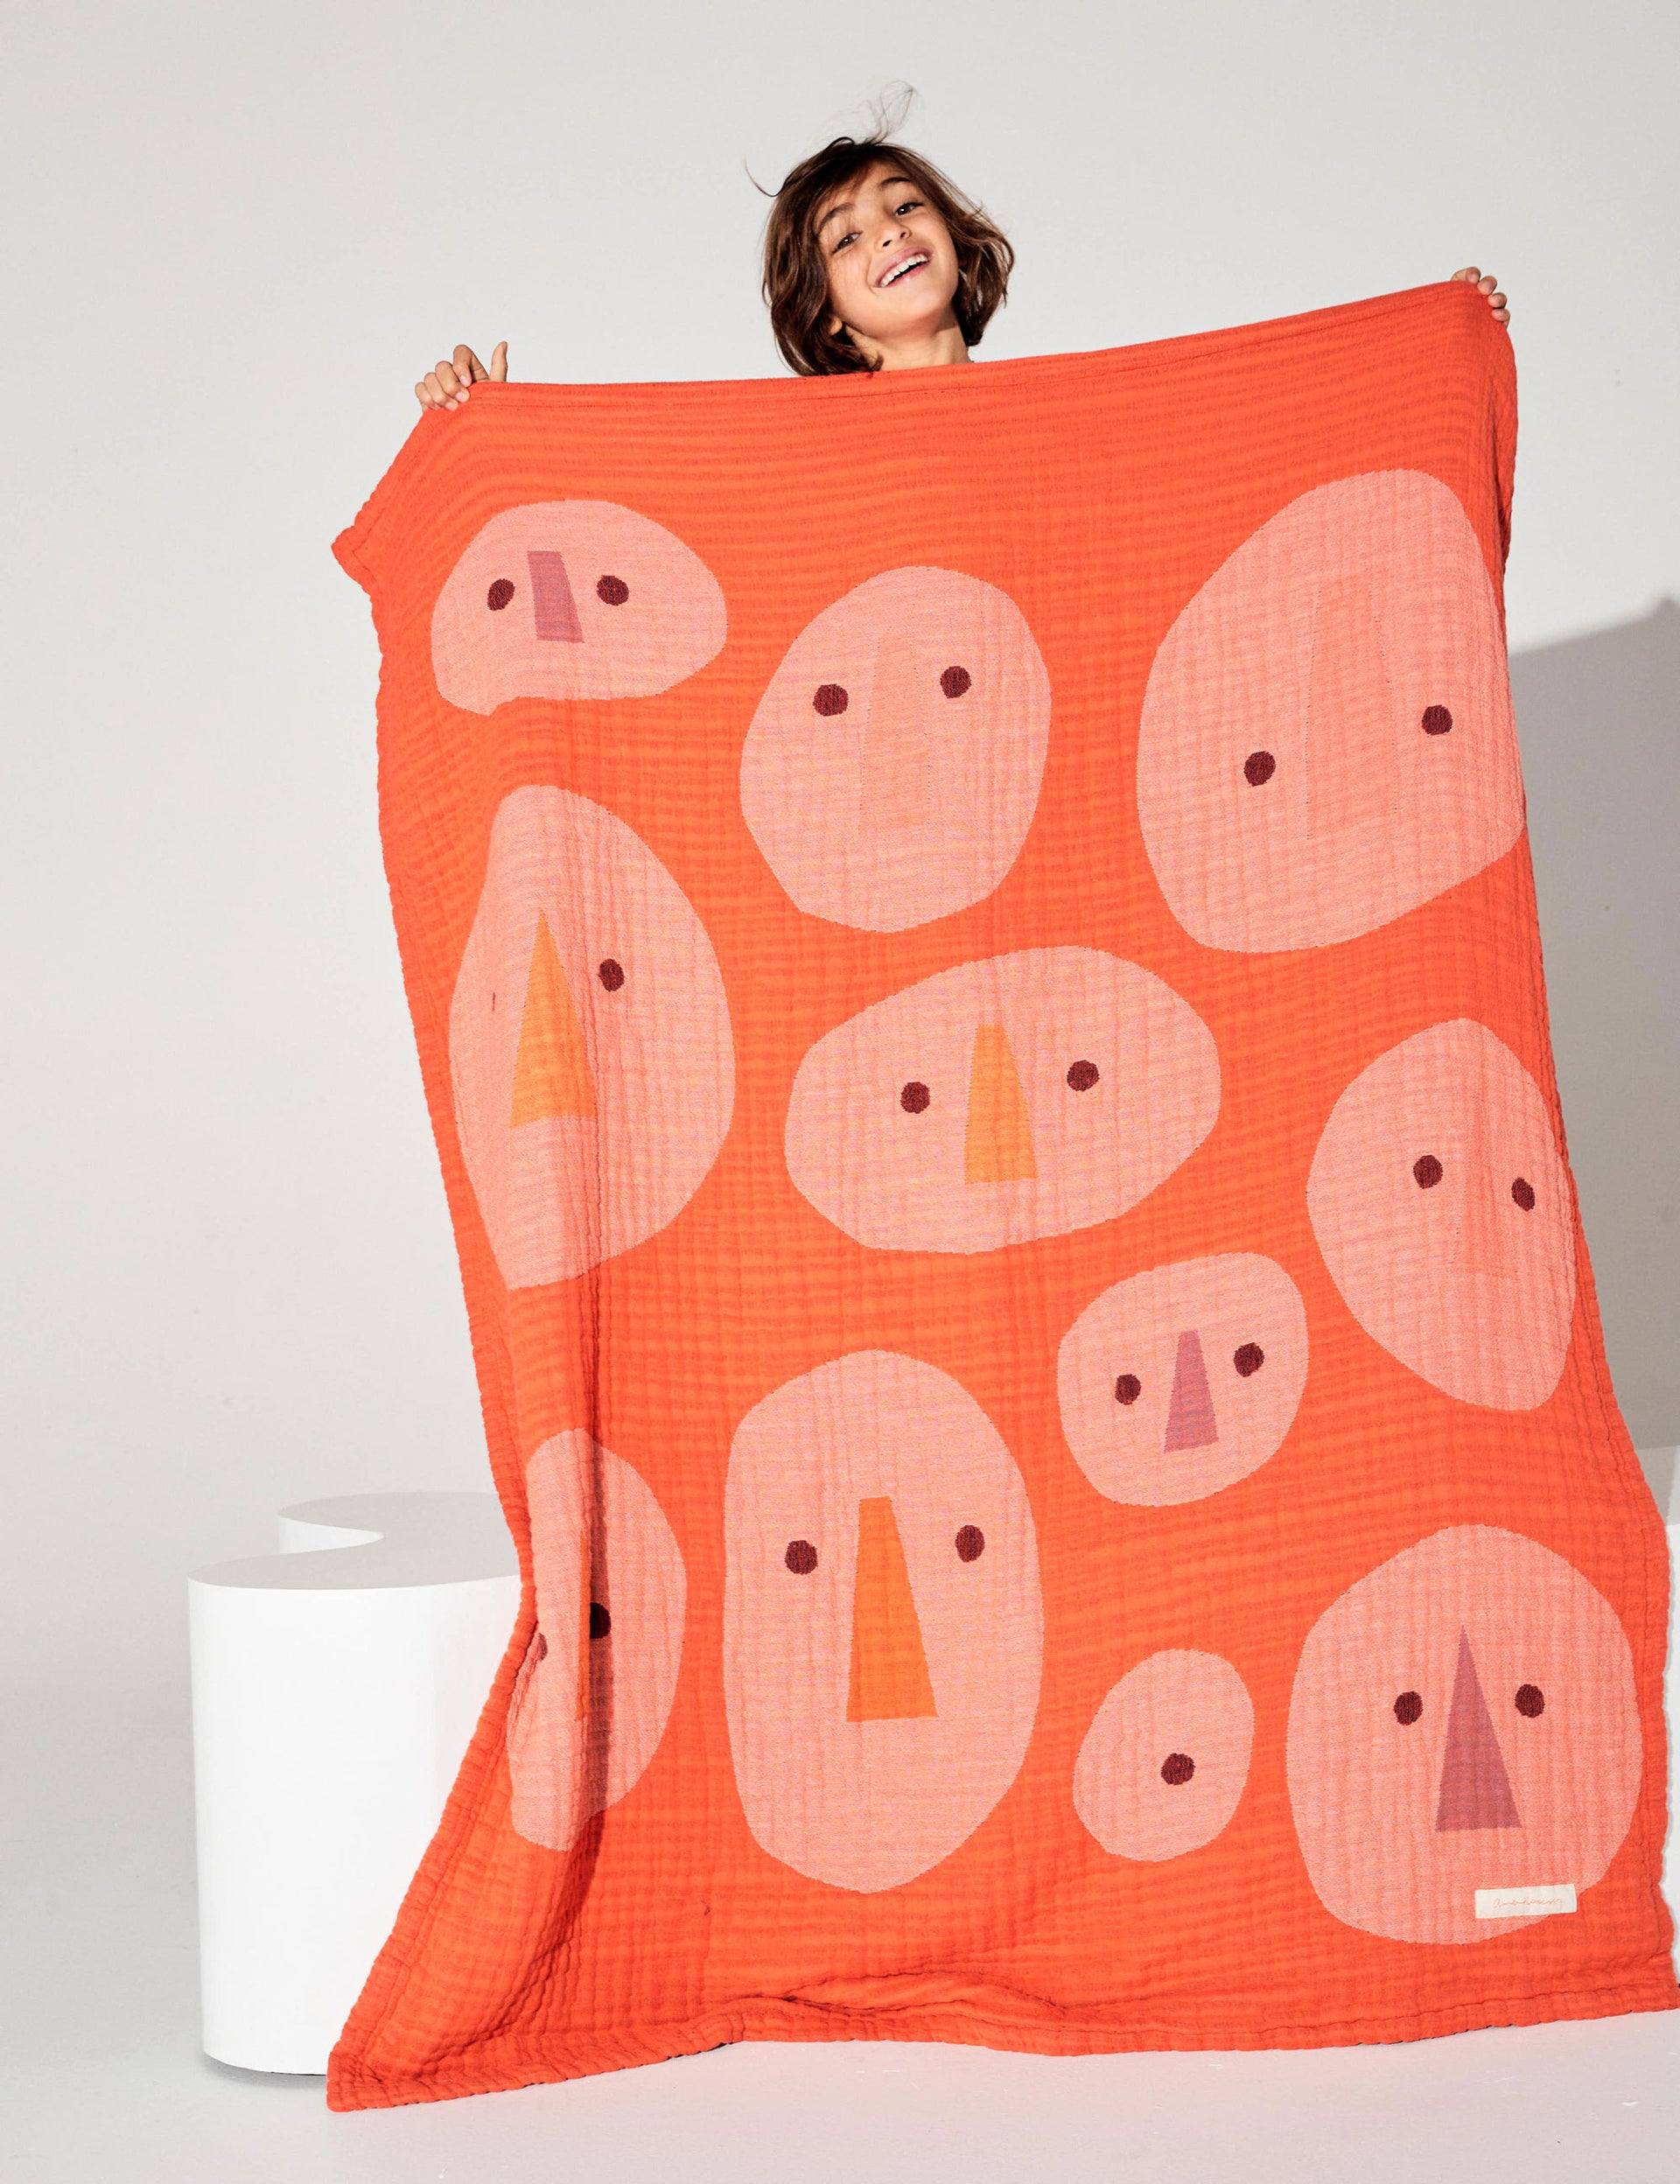 Goldie and Ace X Anna Kövecses Fun Faces Woven Bedspread Blanket